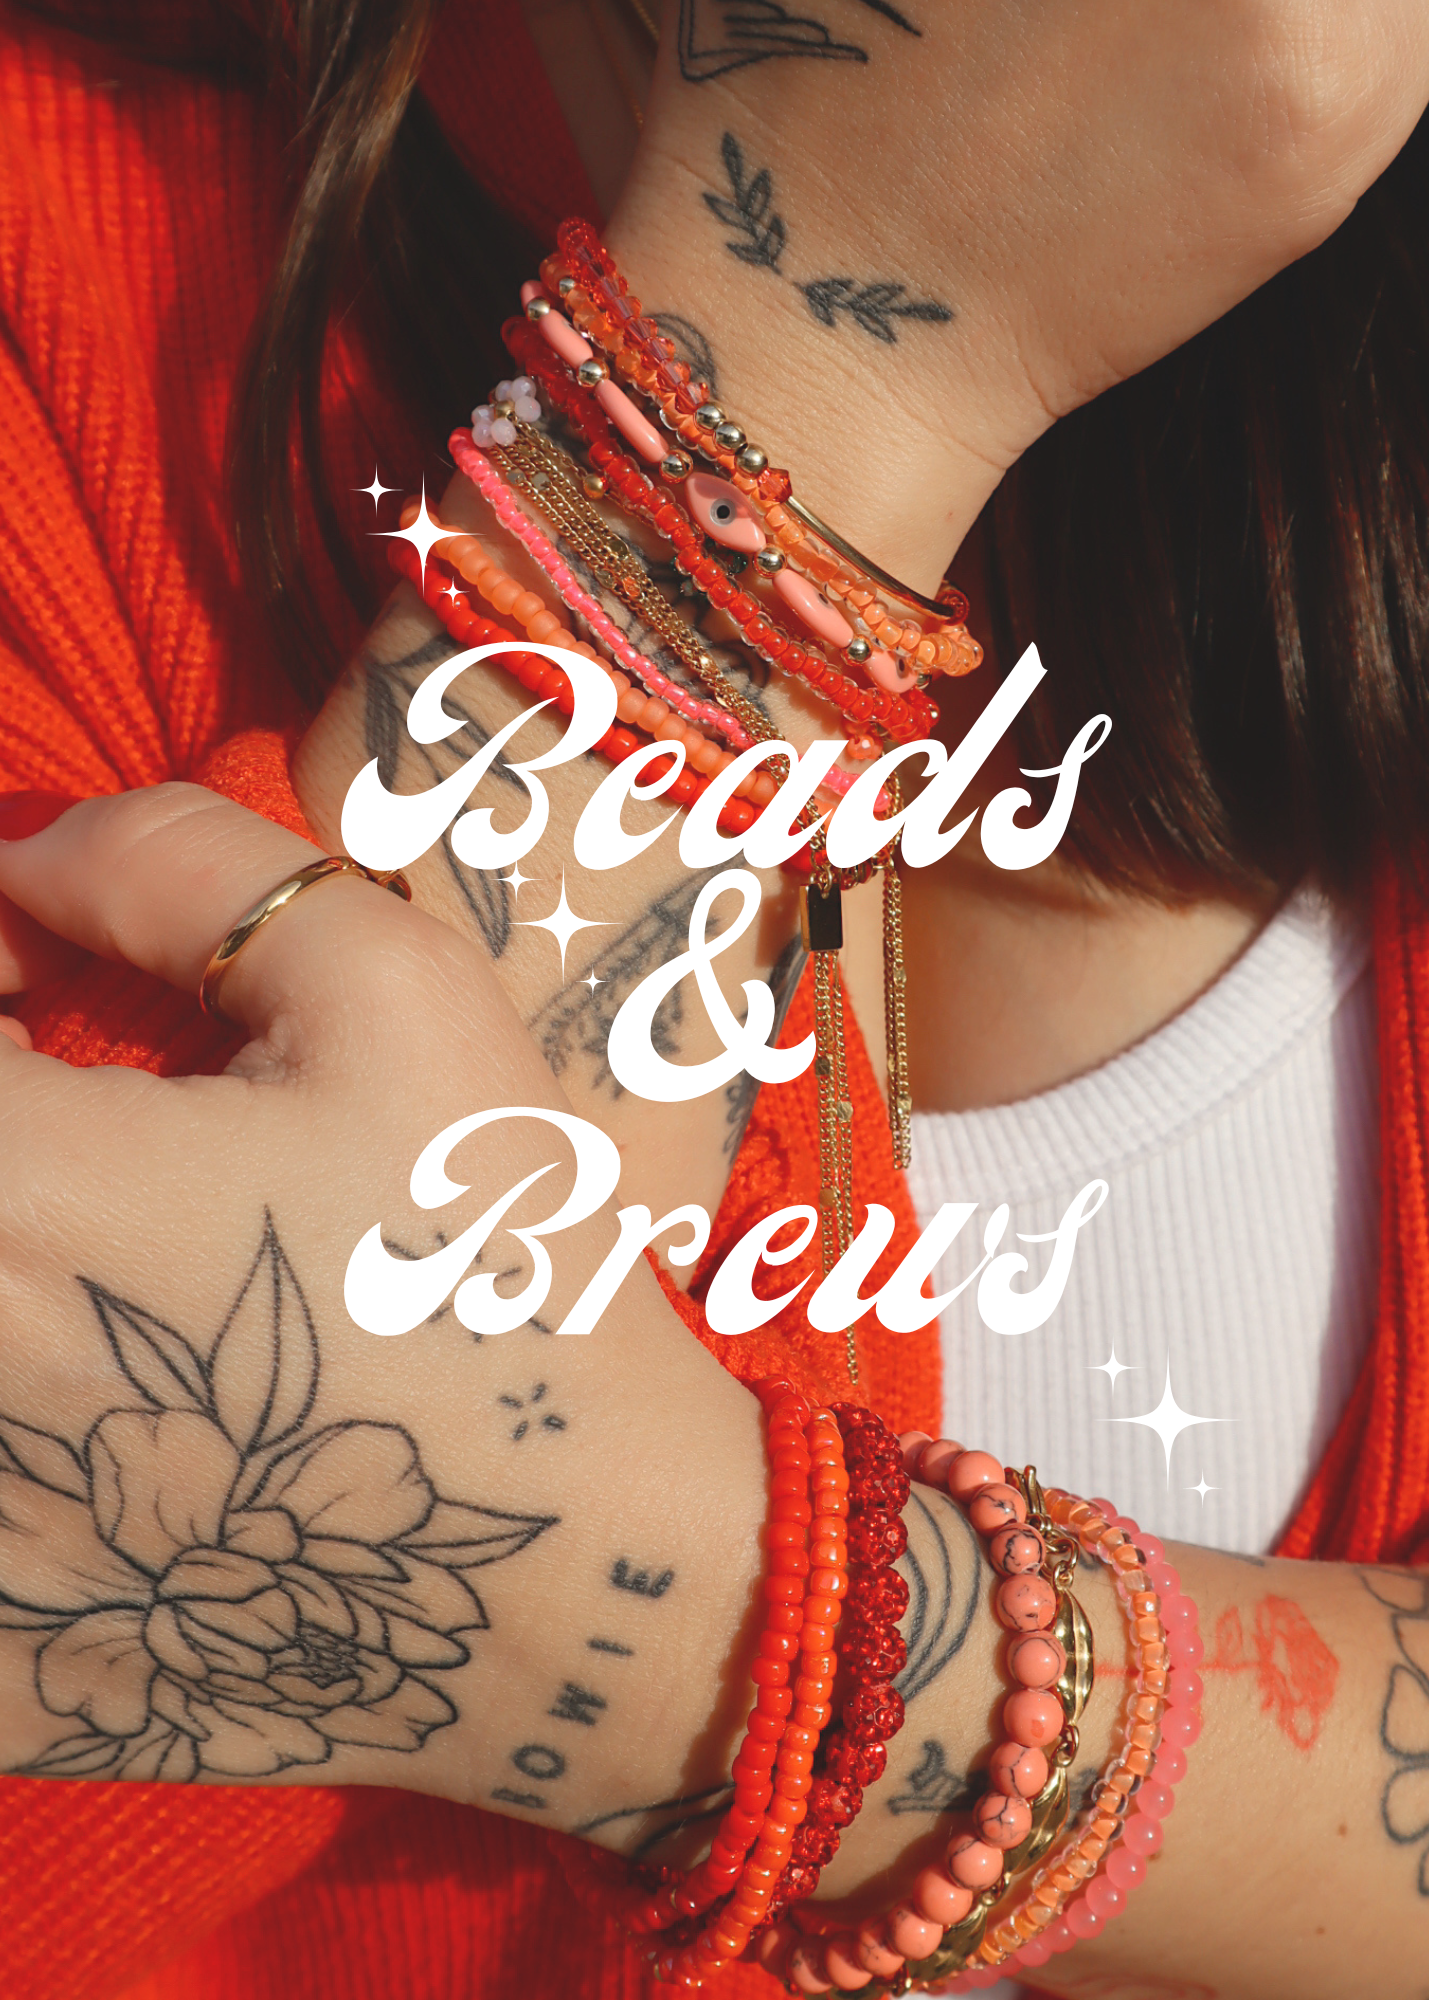 Beads & Brews Event Ticket - Private for Carey + Friends